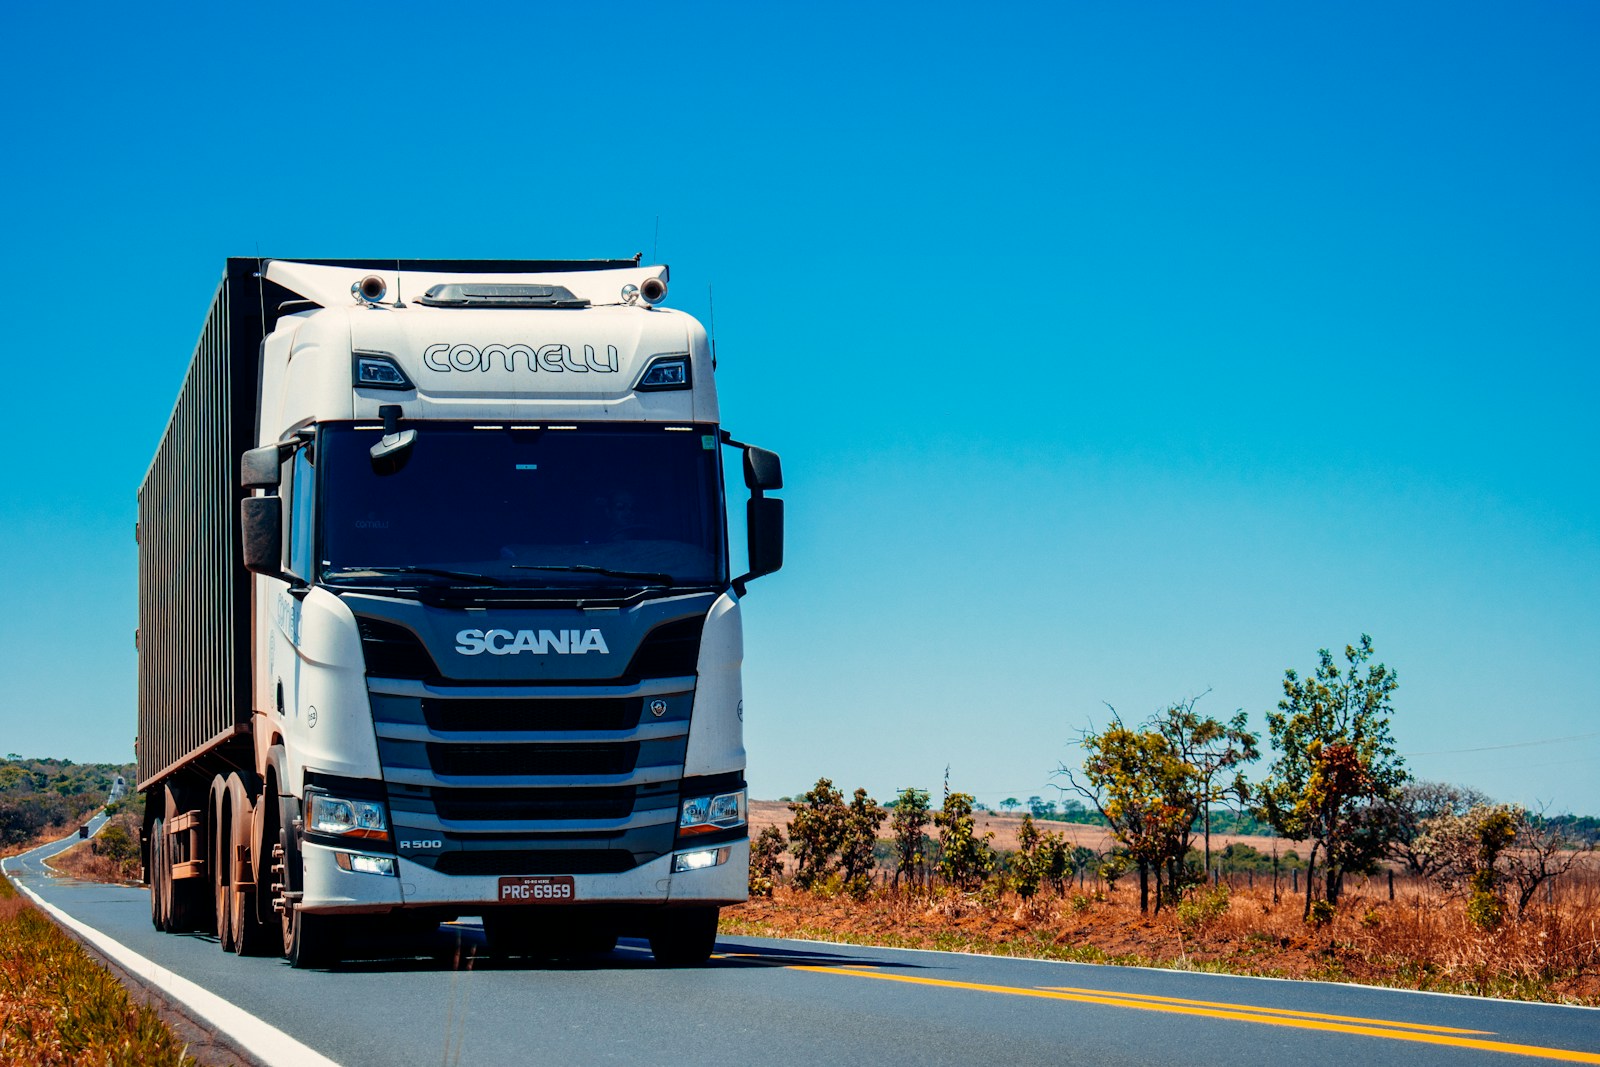 The Benefits of Fleet Management and Vehicle Tracking Systems